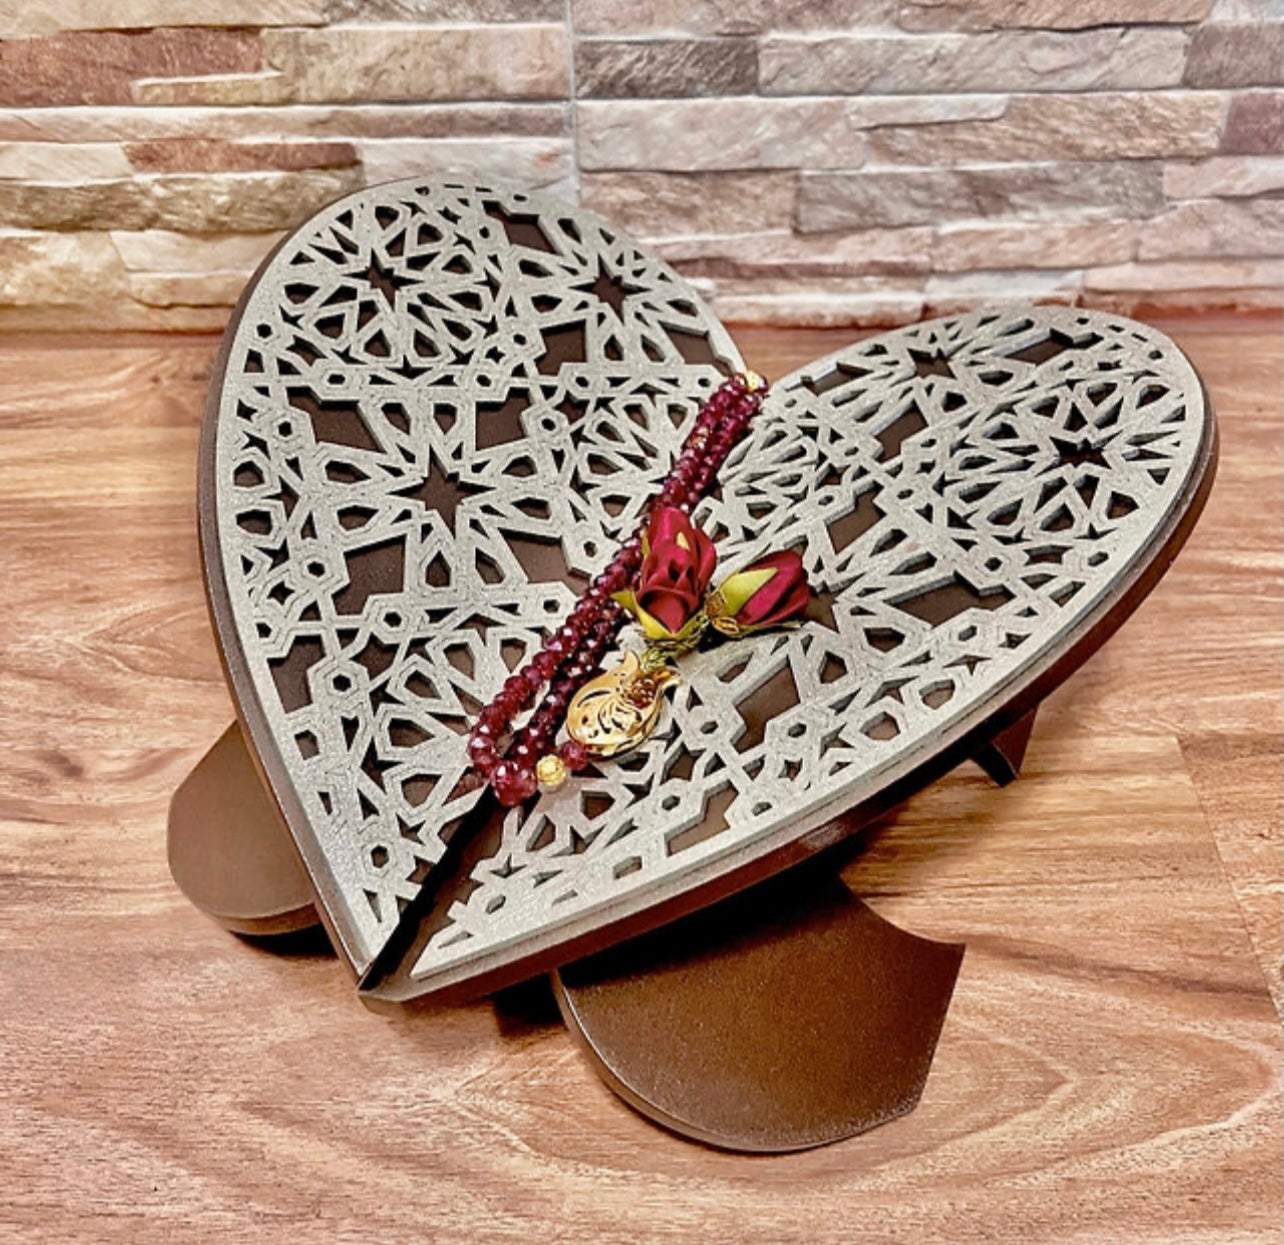 The Heart-Shaped Laser-Cut Designed Rehal